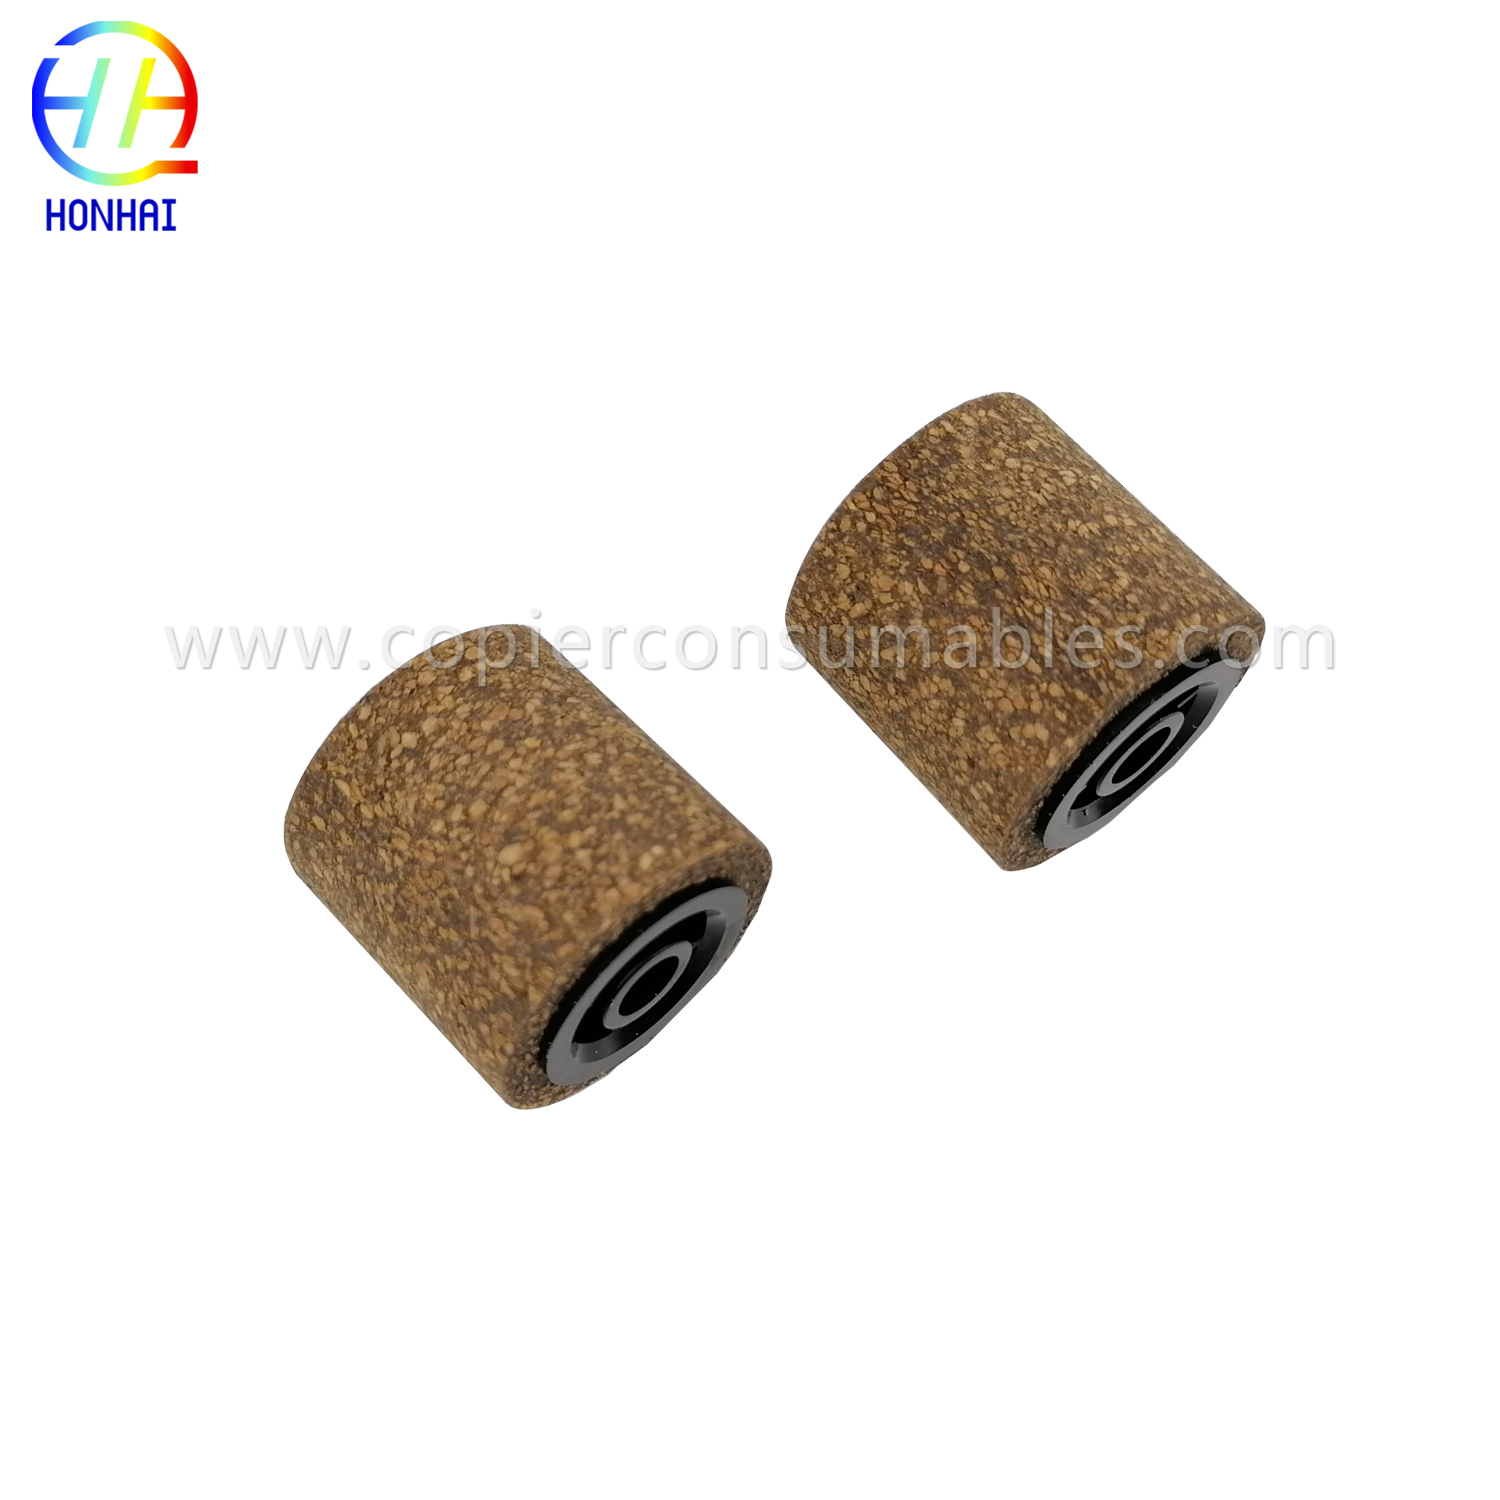 2022 Good Quality Ladies Heated Hair Rollers - Doc Feeder Separation (Reverse) Roller for Ricoh A8592241 MP4000 MP4002 MP7000 MP7001 MP7500 1085 1050 1055 1060 1070 – HONHAI